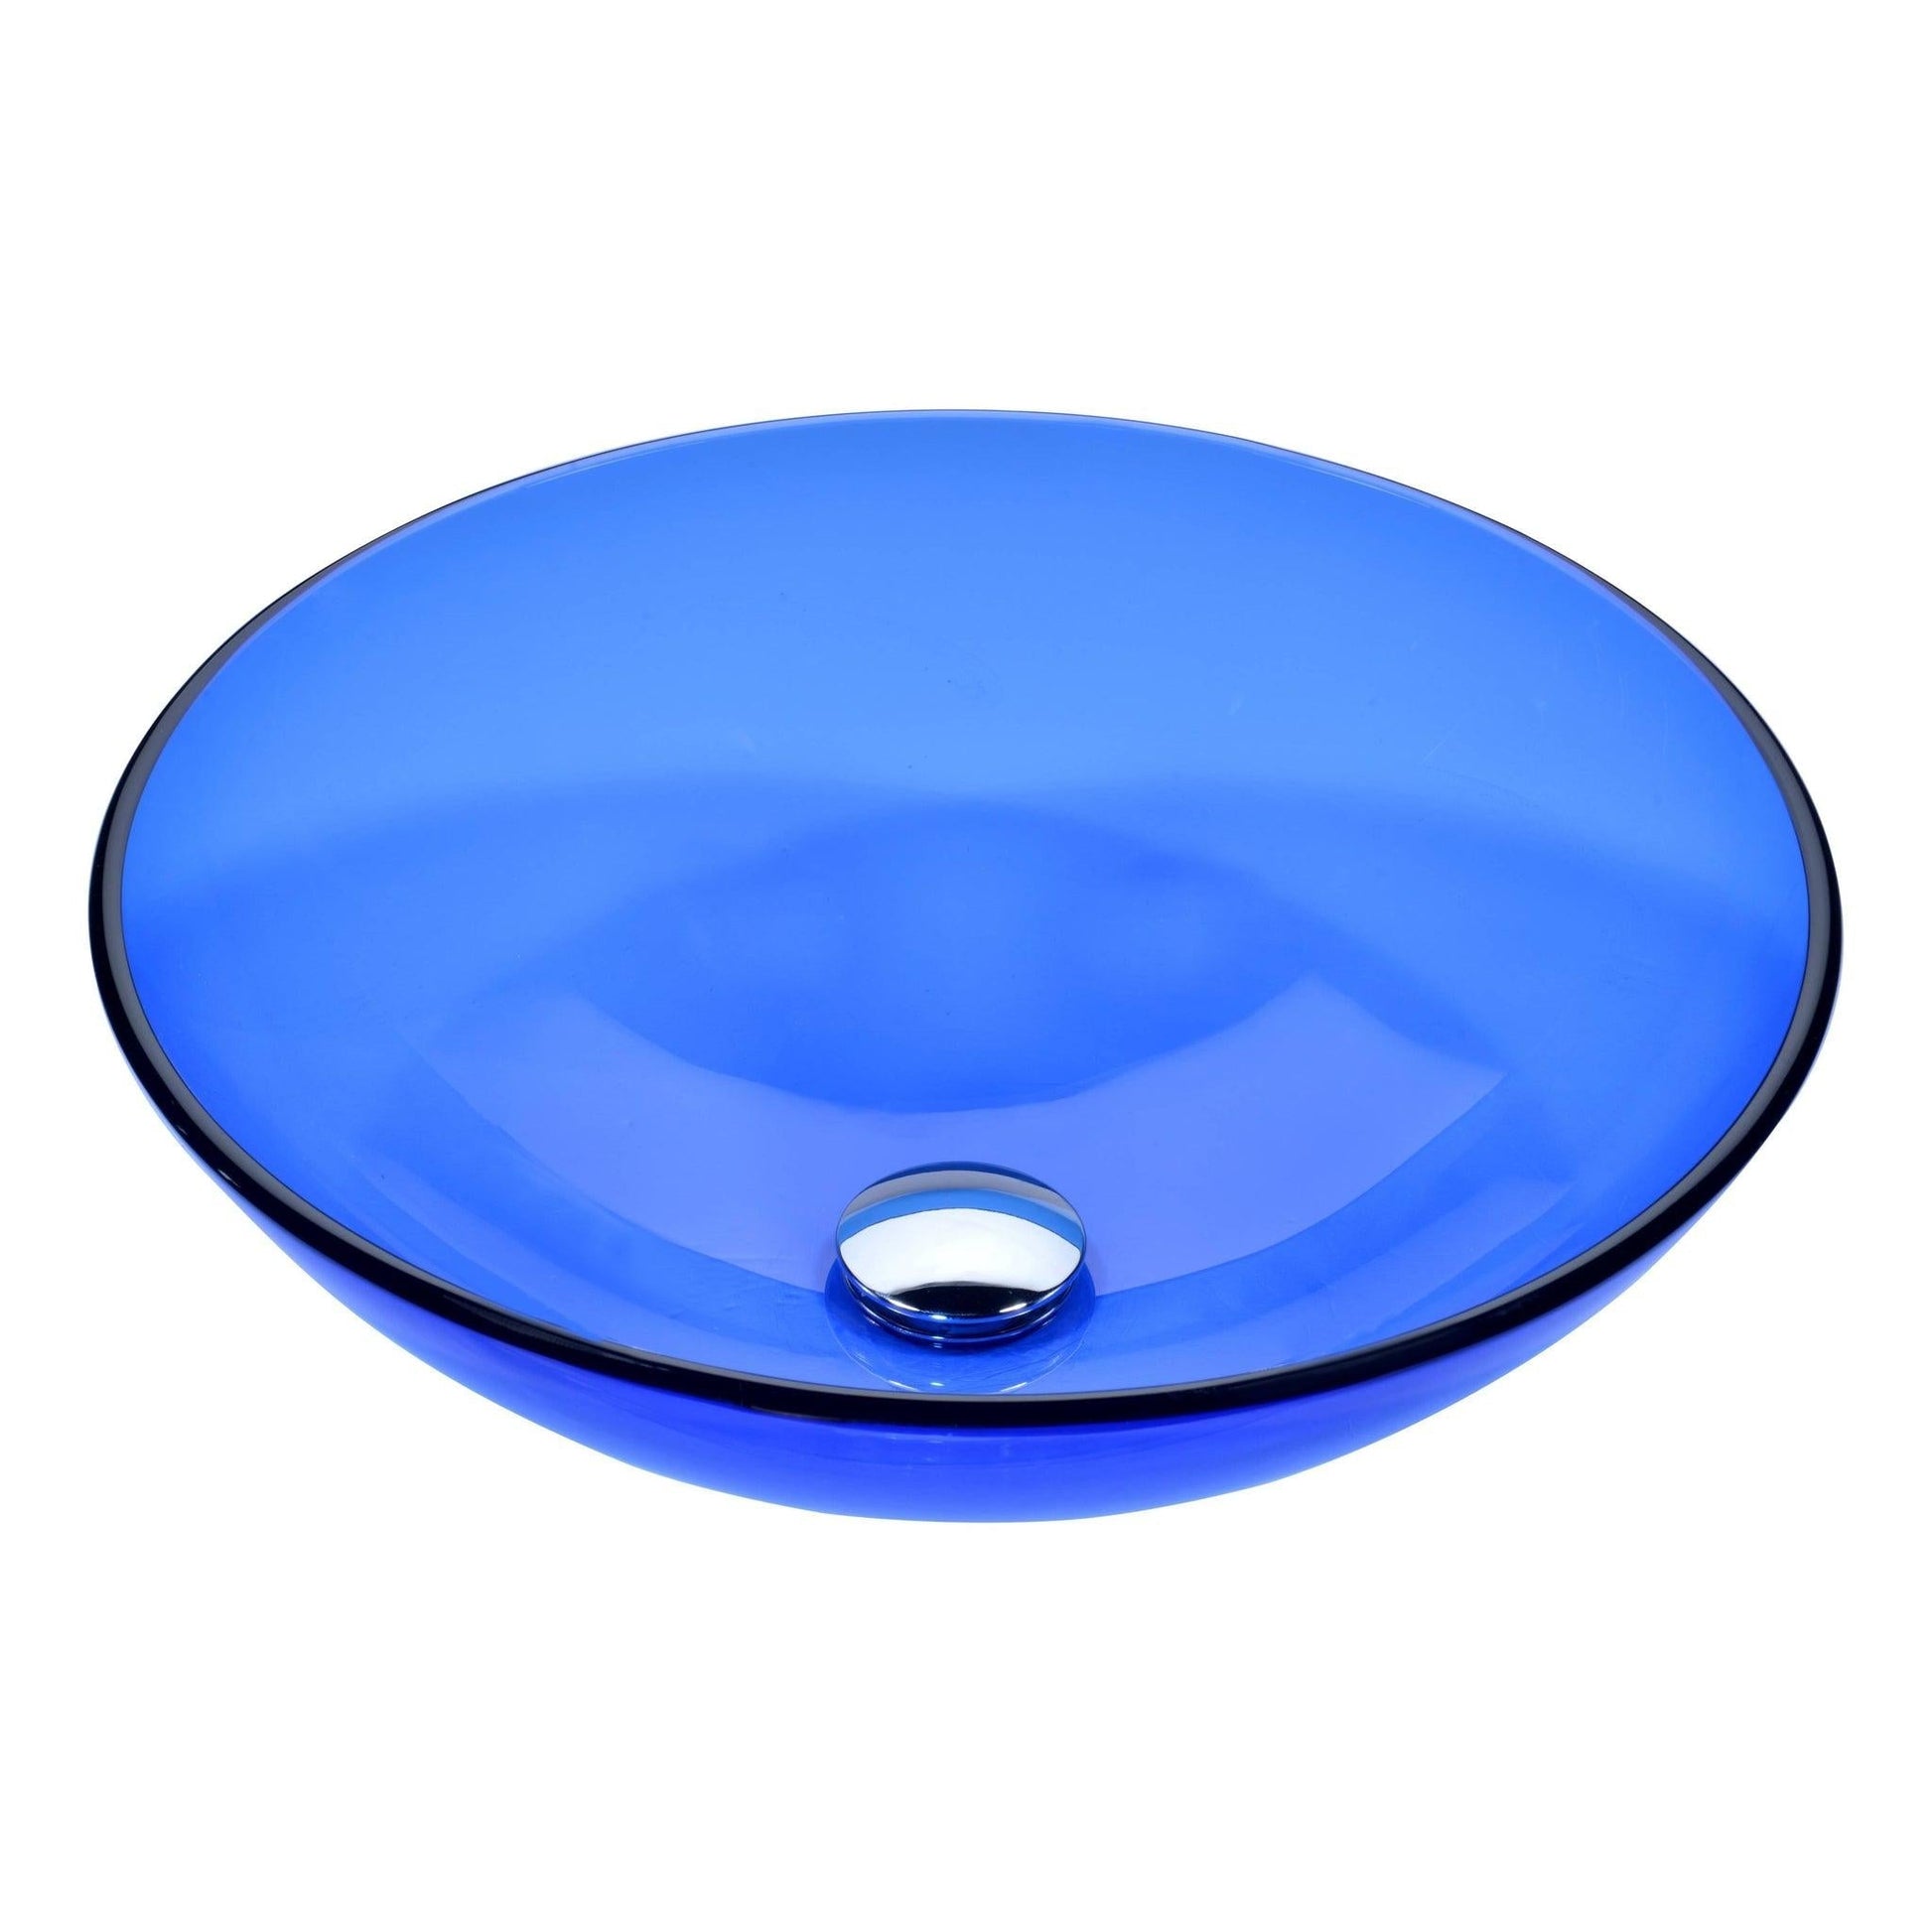 ANZZI Halo Series 17" x 17" Round Blue Deco-Glass Vessel Sink With Polished Chrome Pop-Up Drain